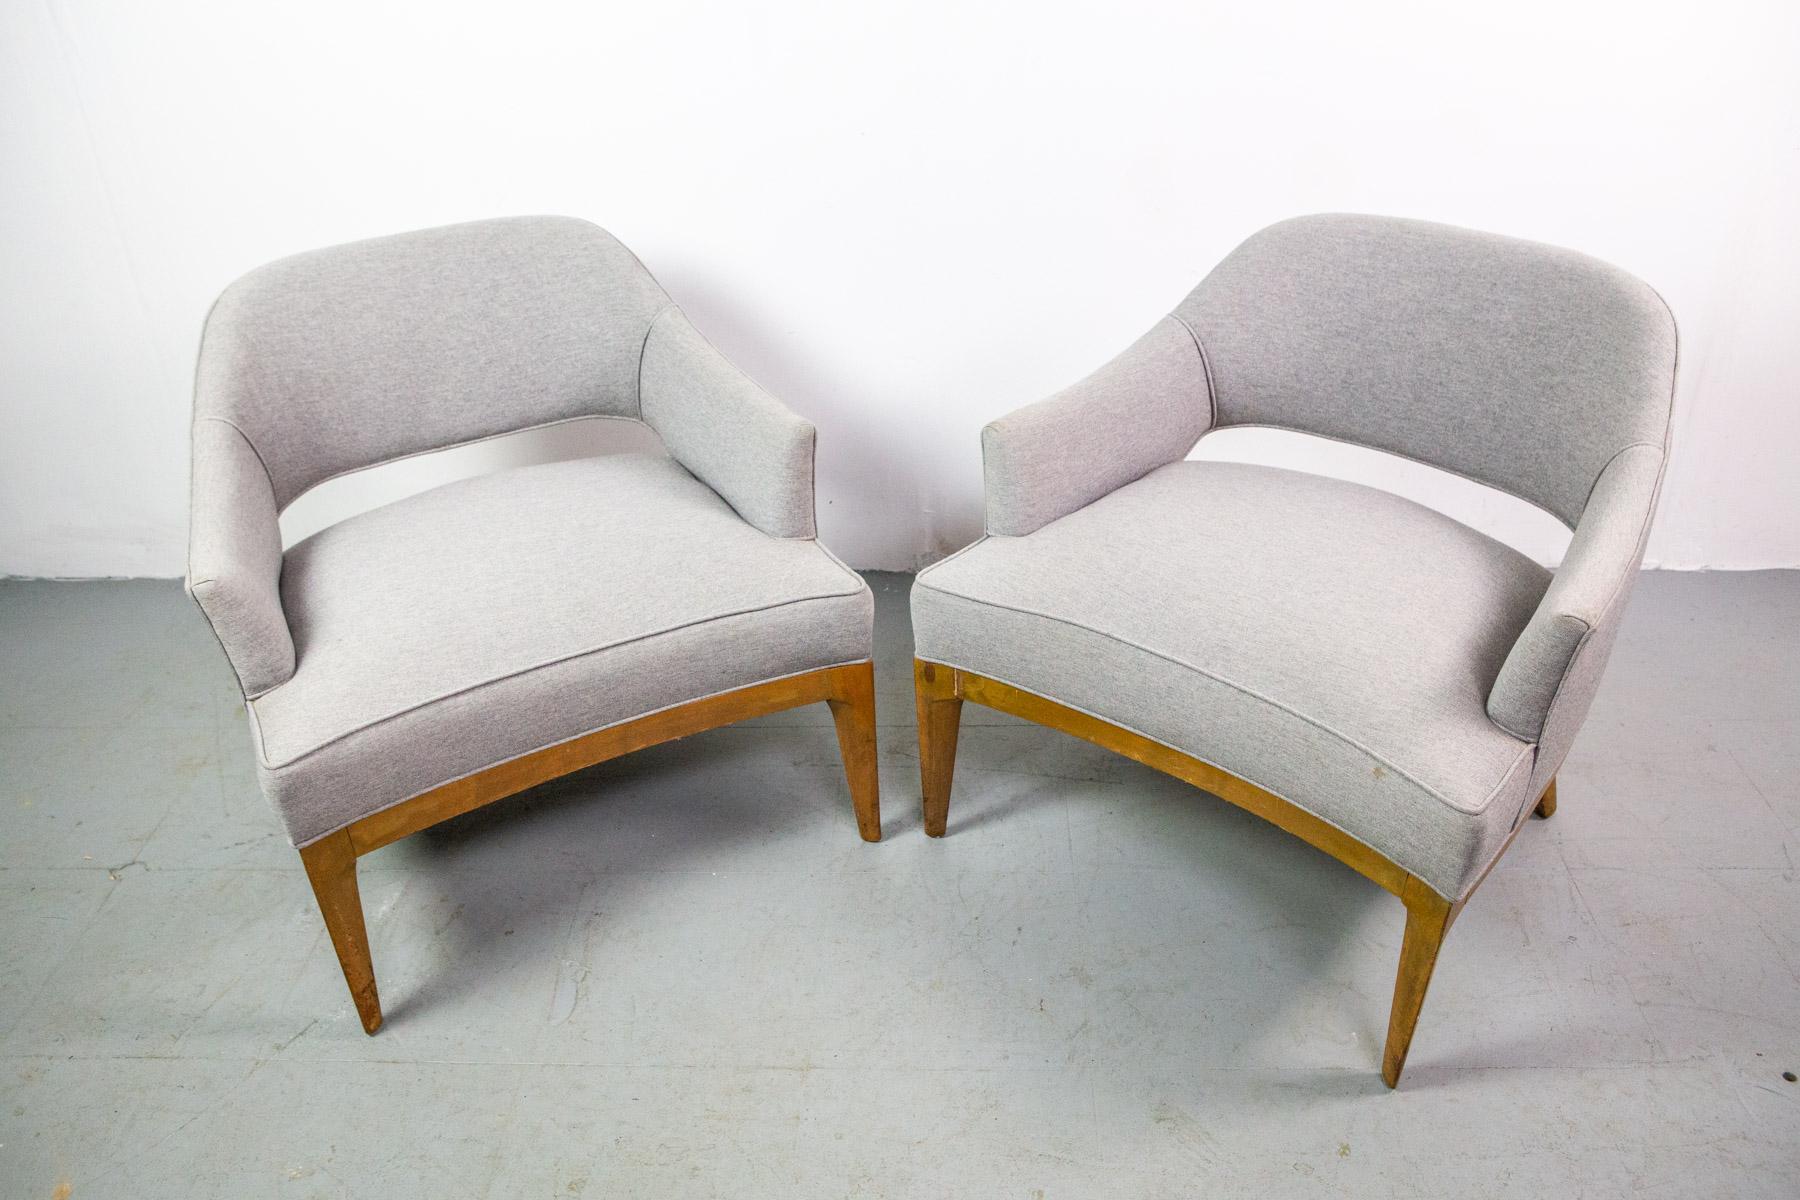 A chic pair of Harvey Probber lounge chairs. The fin shaped legs flow into the frame at an angle making a beautiful sculptural statement. These versatile chairs are super comfortable and handsome.